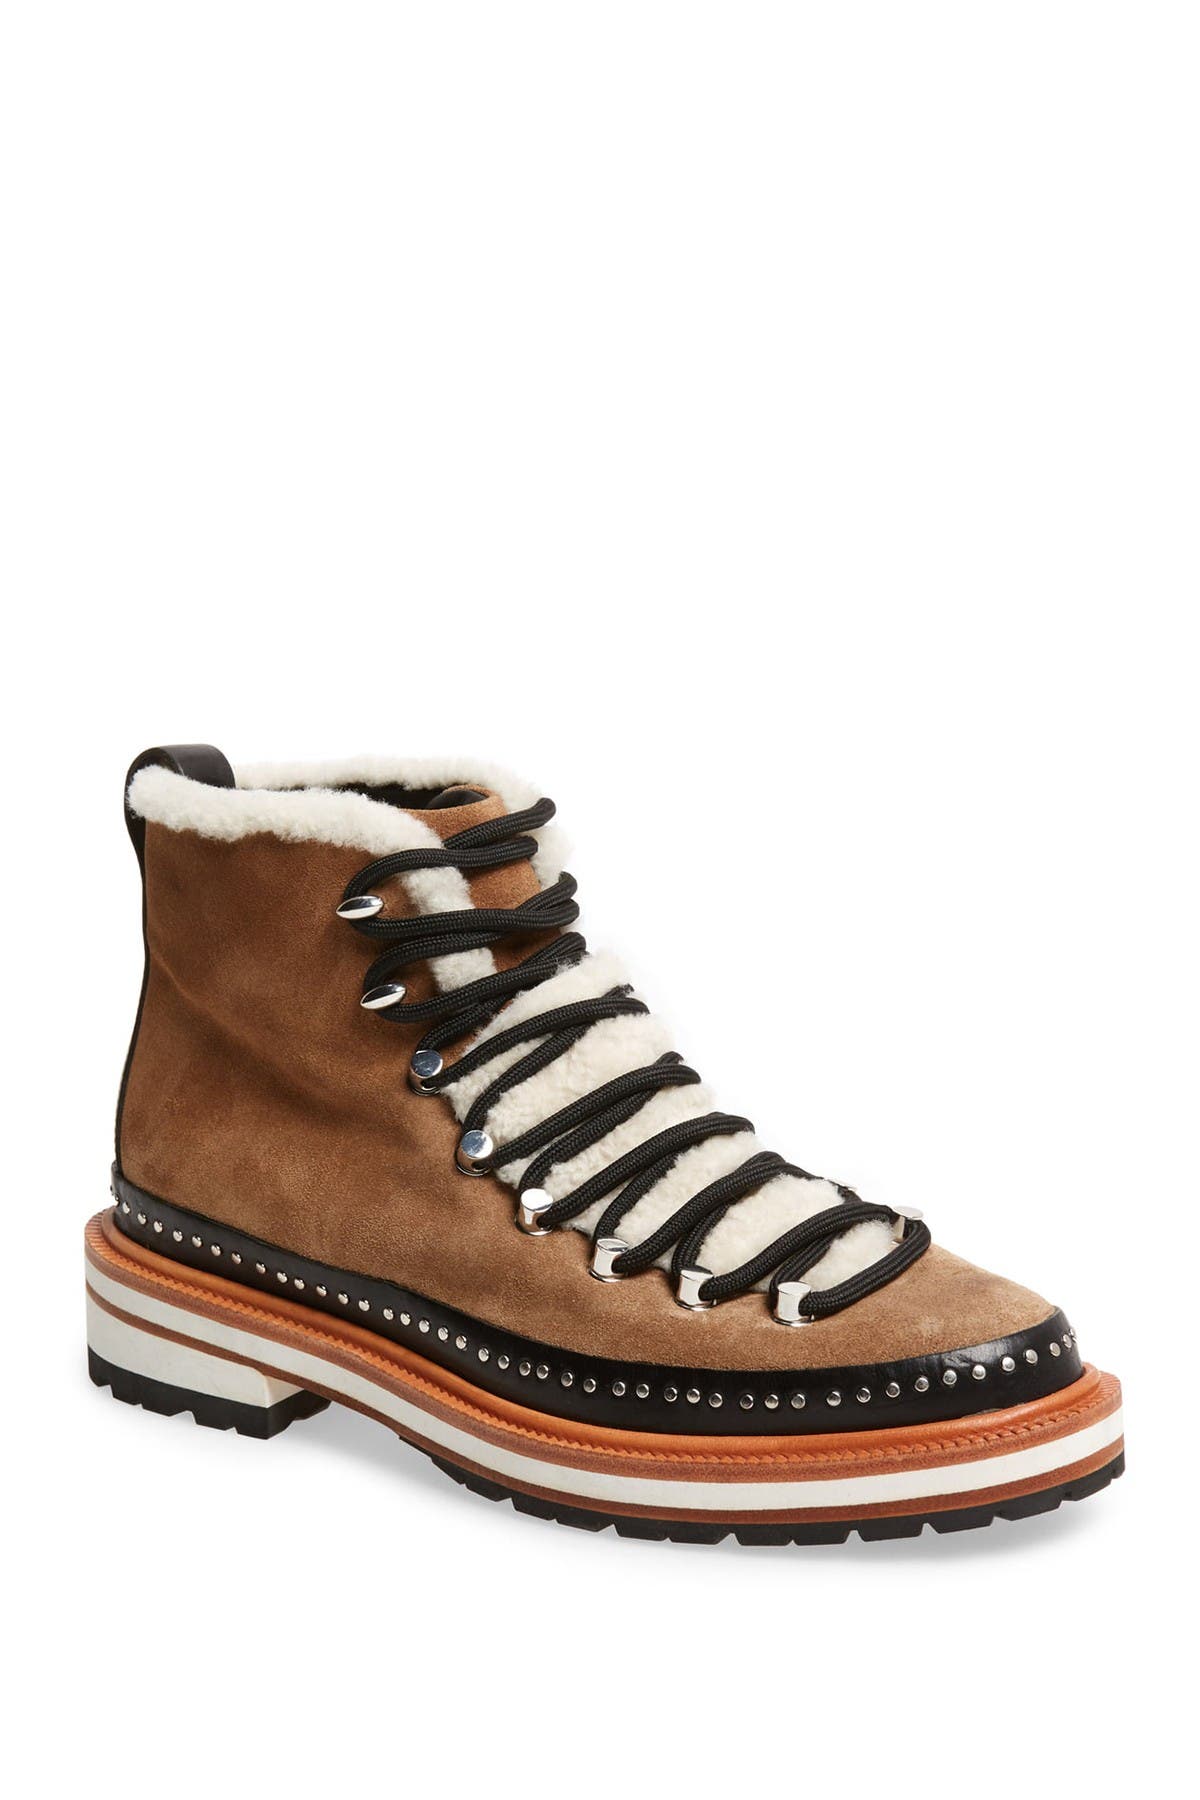 rag and bone compass shearling boots